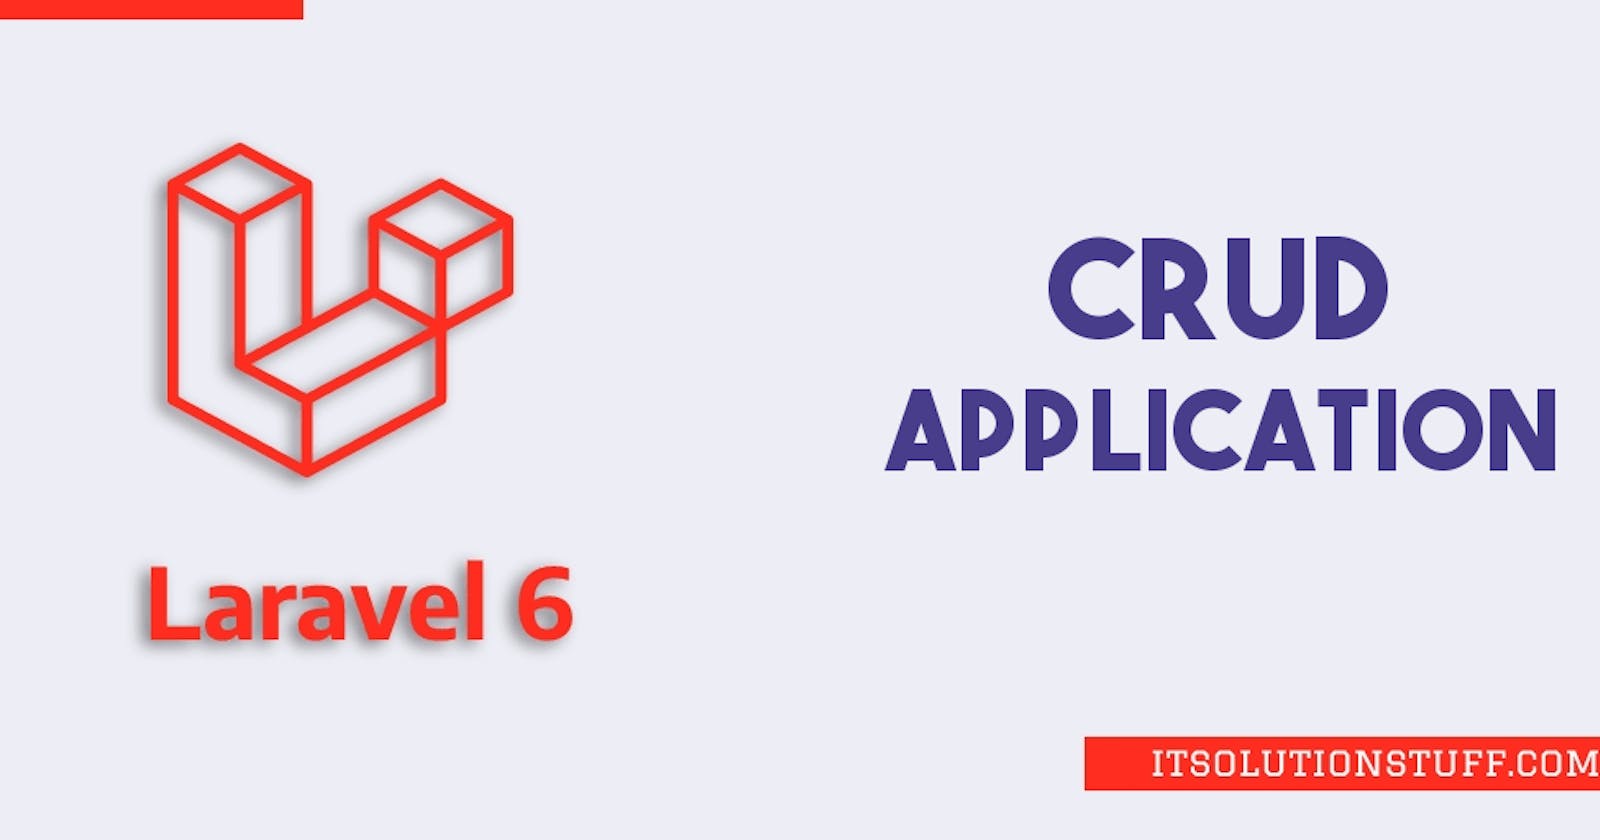 Step by Step CRUD Application with Laravel 6